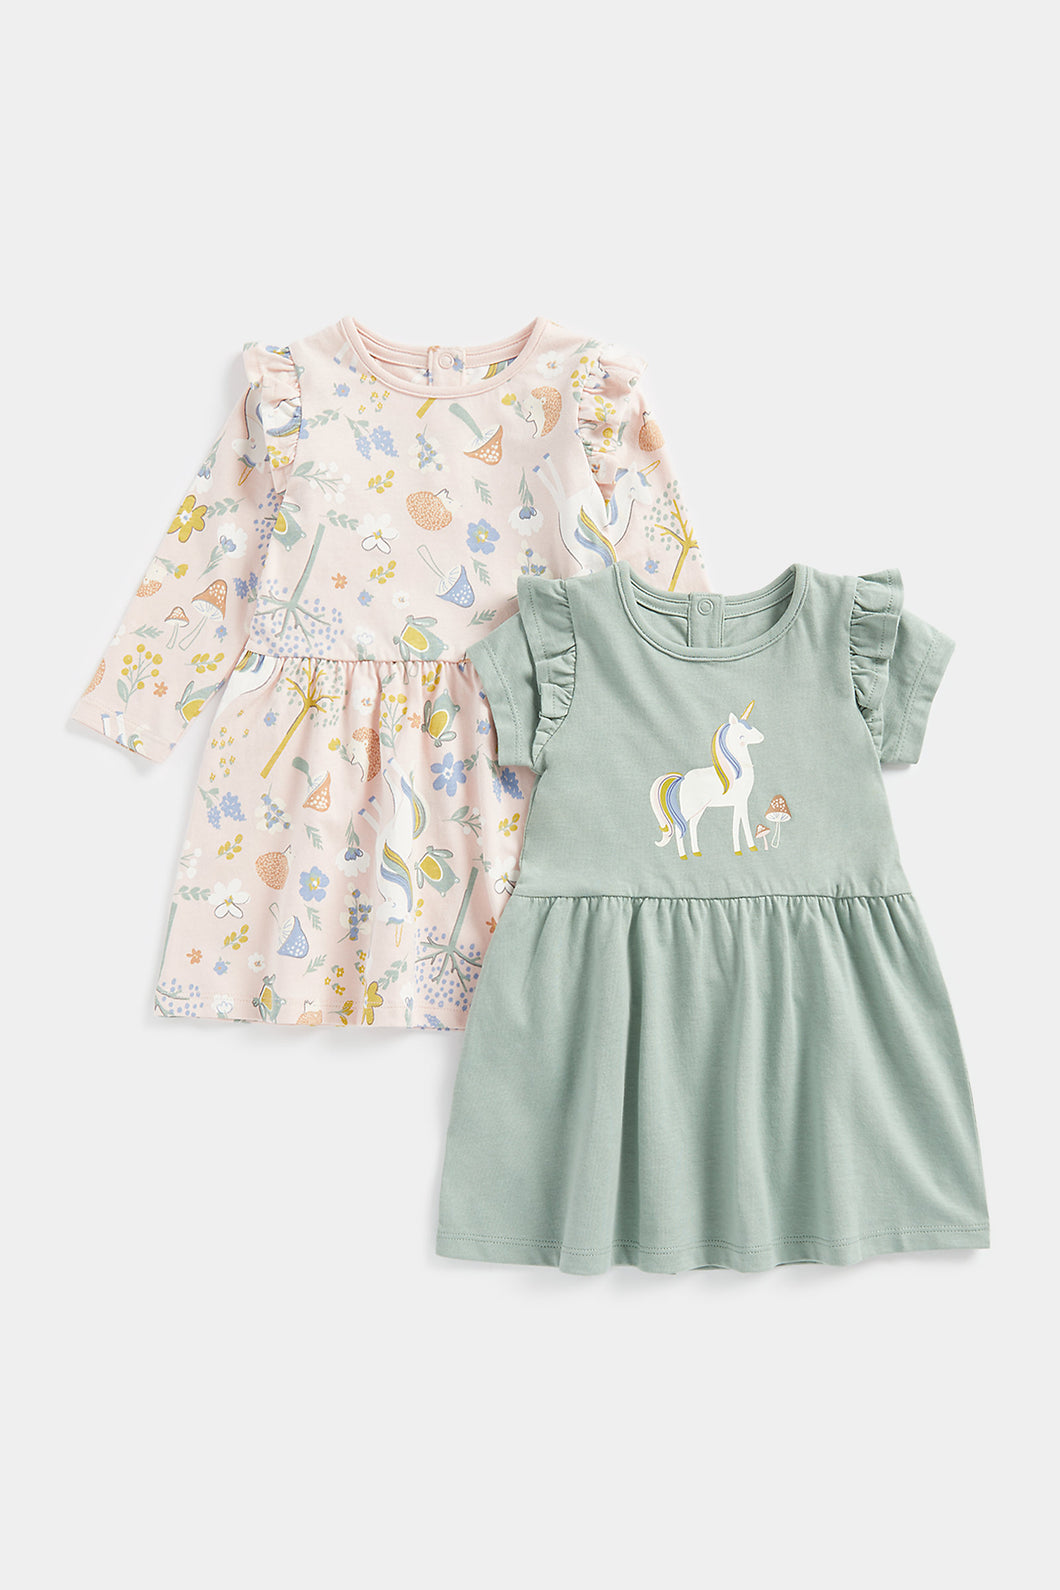 Mothercare Enchanted Jersey Dresses - 2 Pack